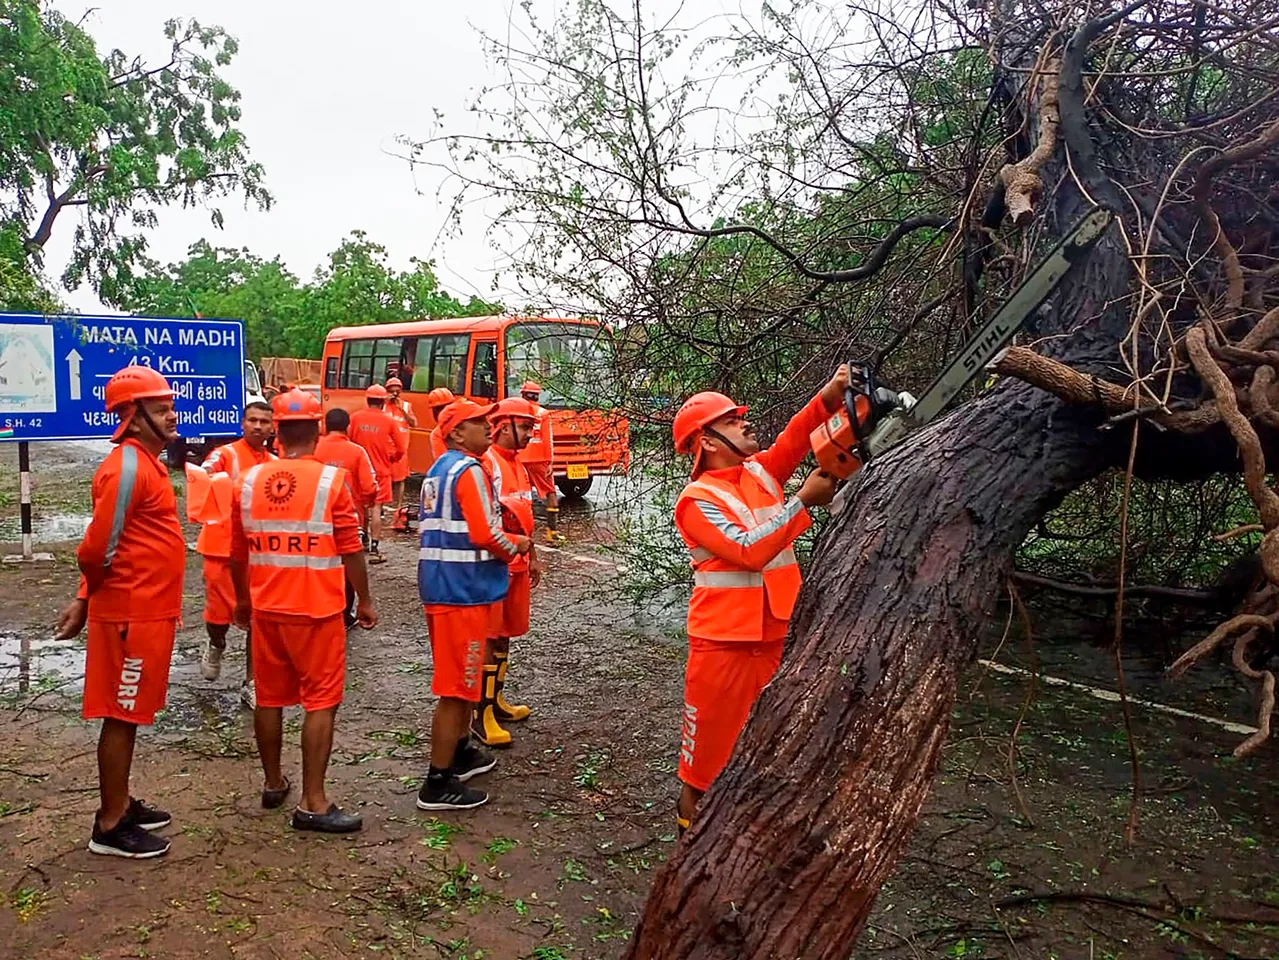 NDRF personnel clear trees uprooted following the landfall of Cyclone Biparjoy, in Gujarat